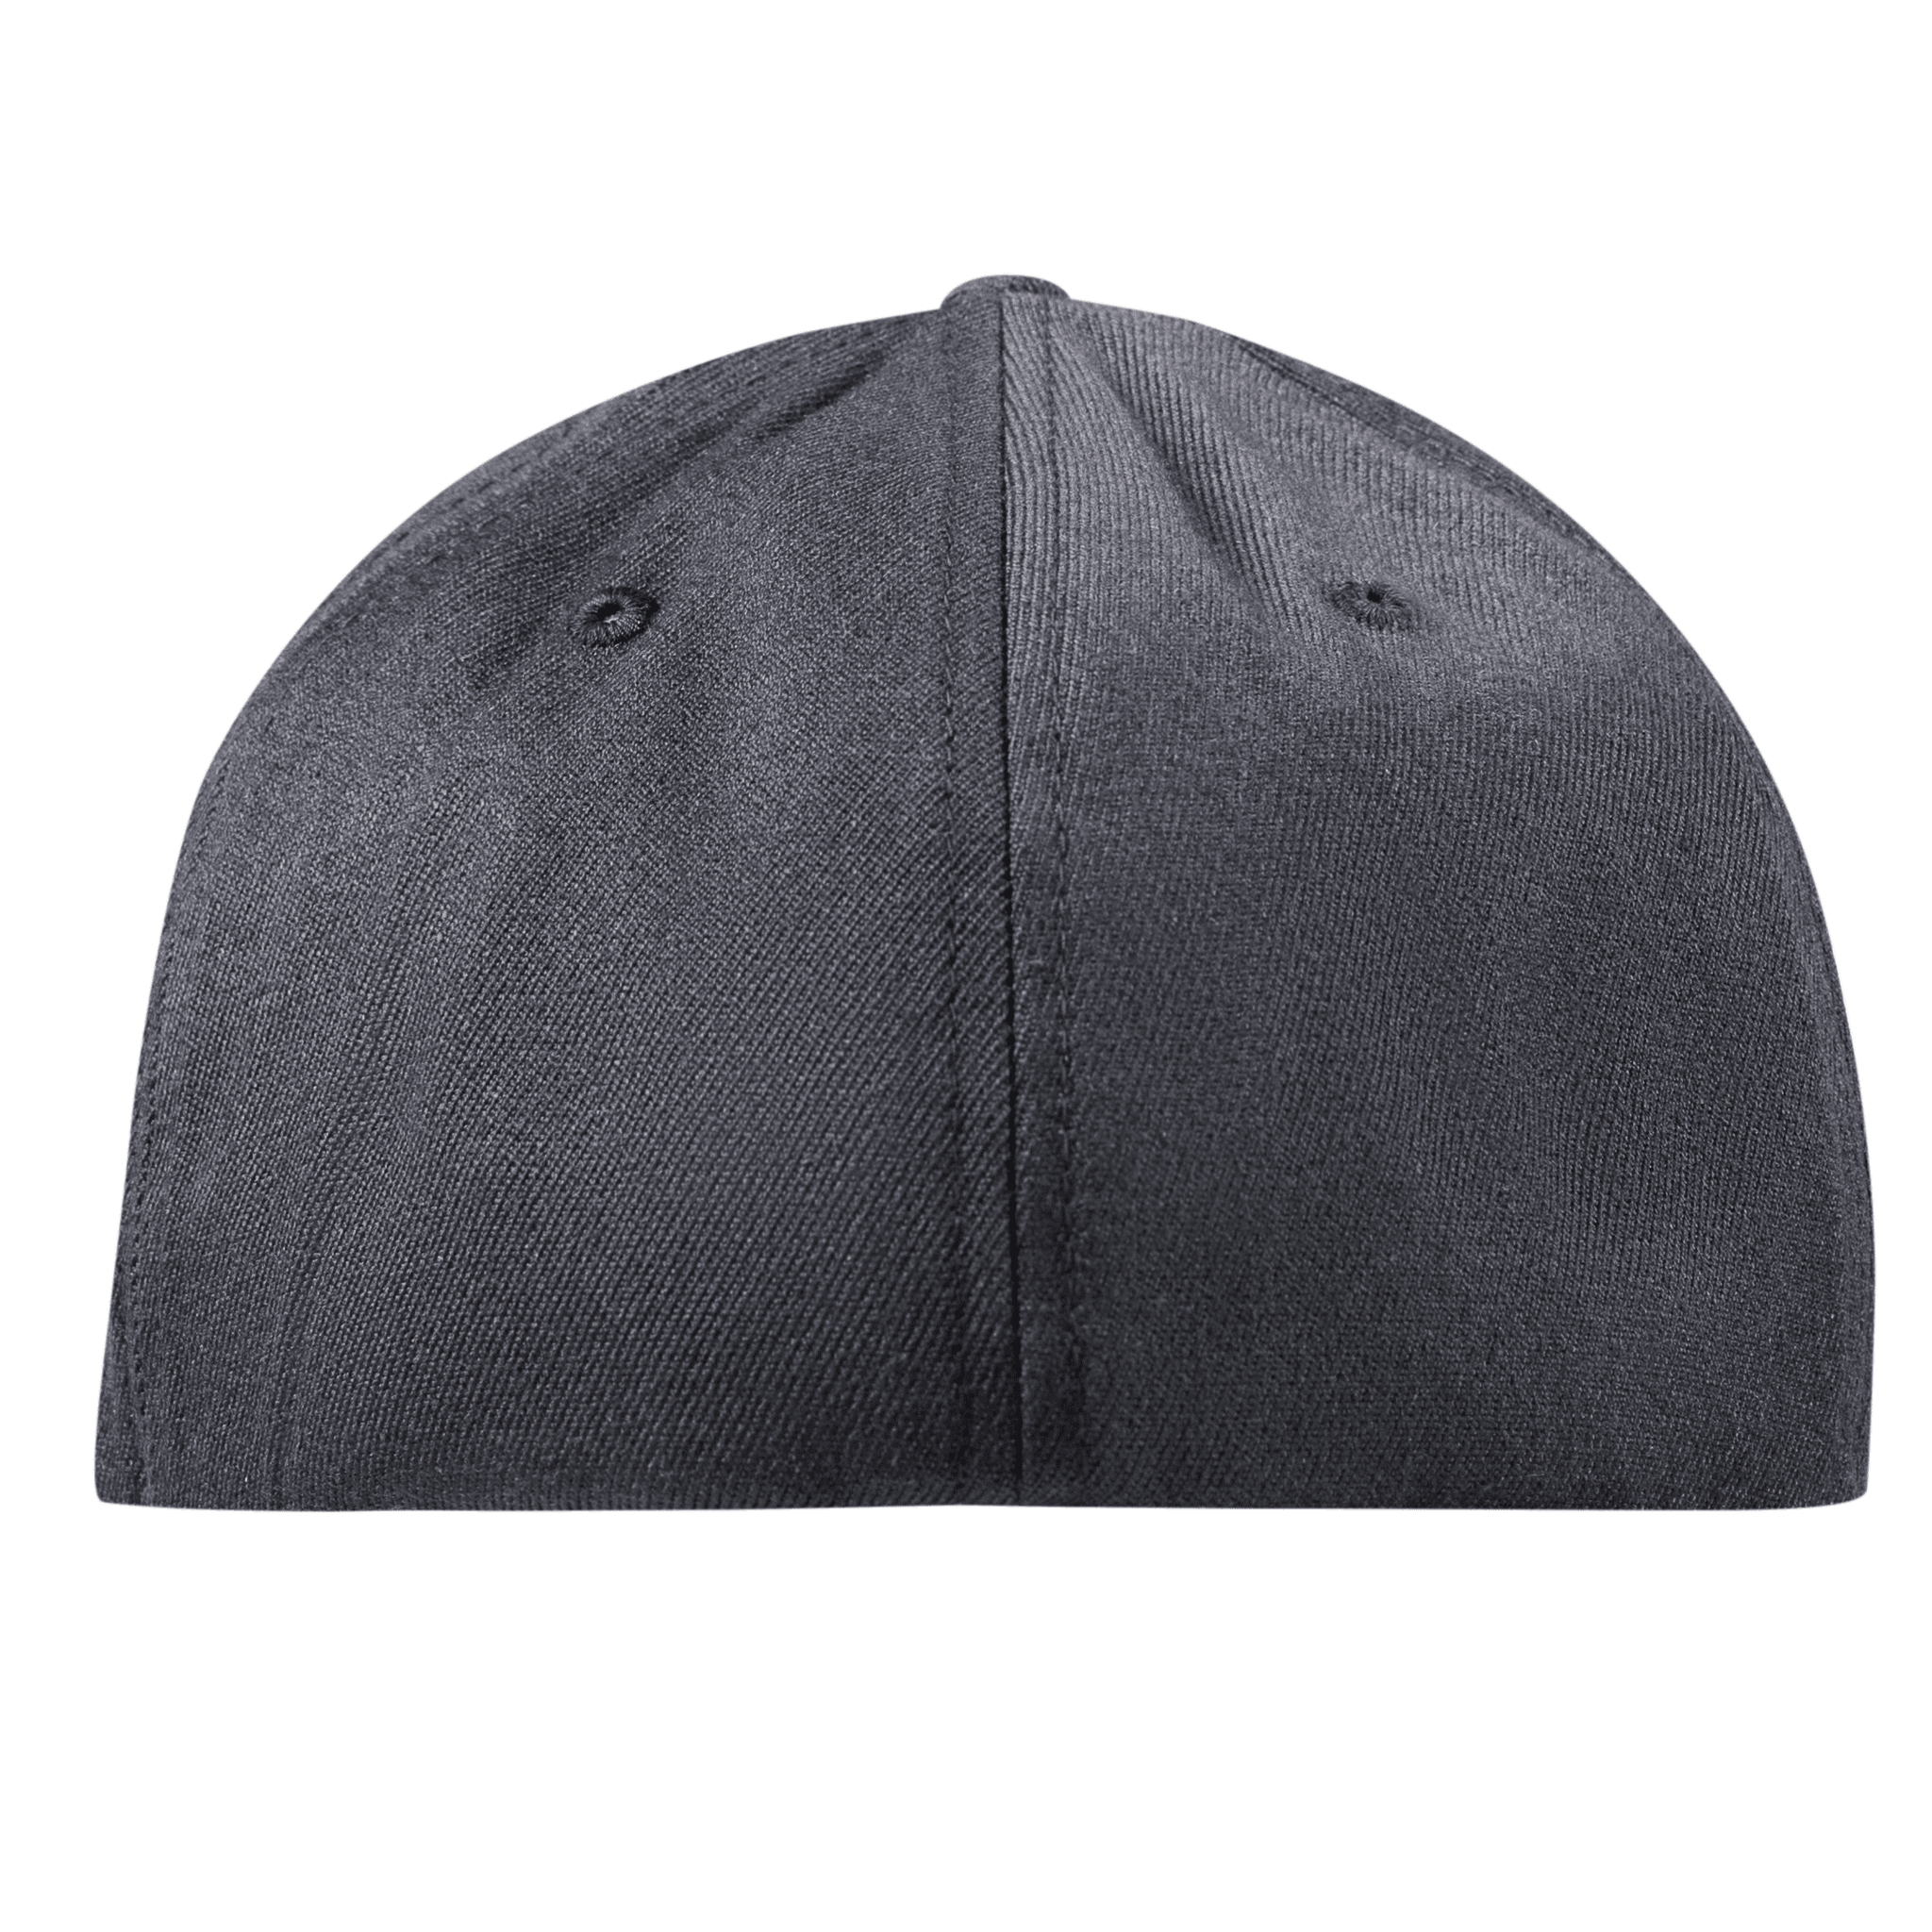 Ohio 17 Flexfit Fitted Back Charcoal